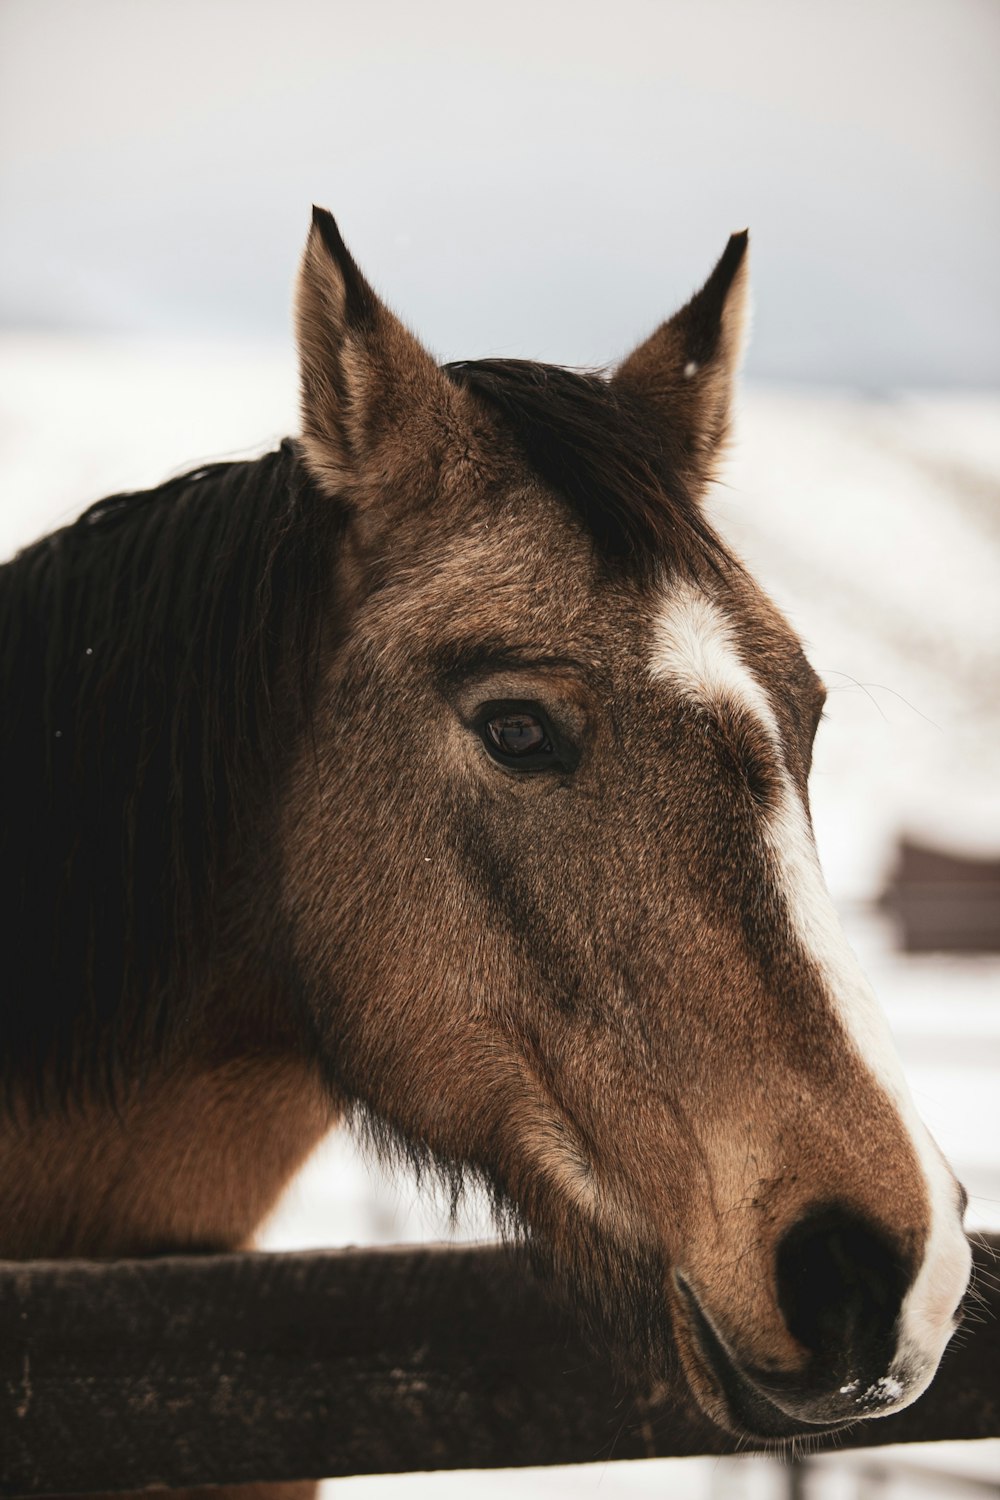 shallow focus photo of brown horse